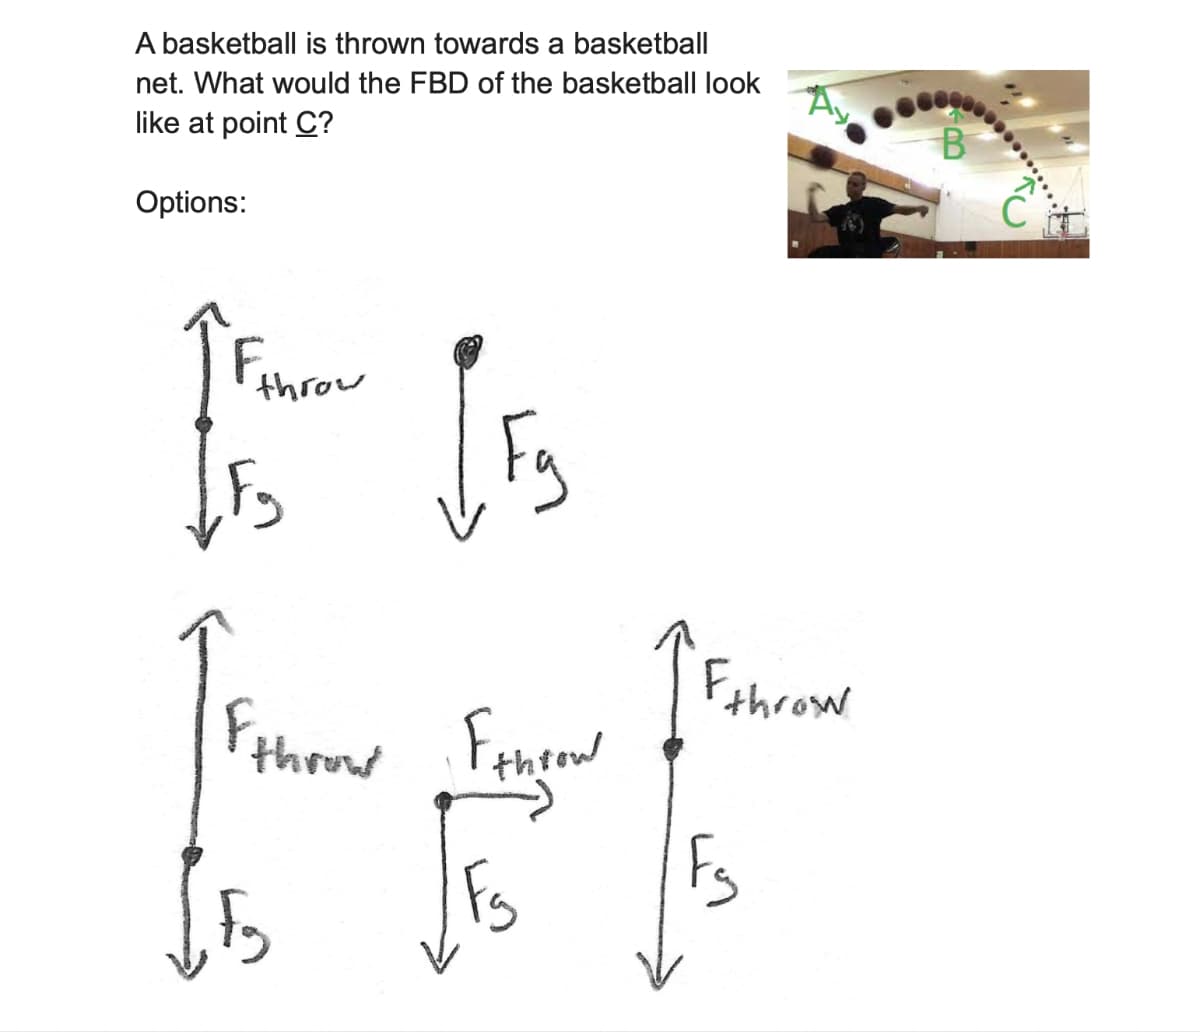 A basketball is thrown towards a basketball
net. What would the FBD of the basketball look
like at point C?
Options:
B
throw
والا
Fg
throw throw
IF throw
Fs